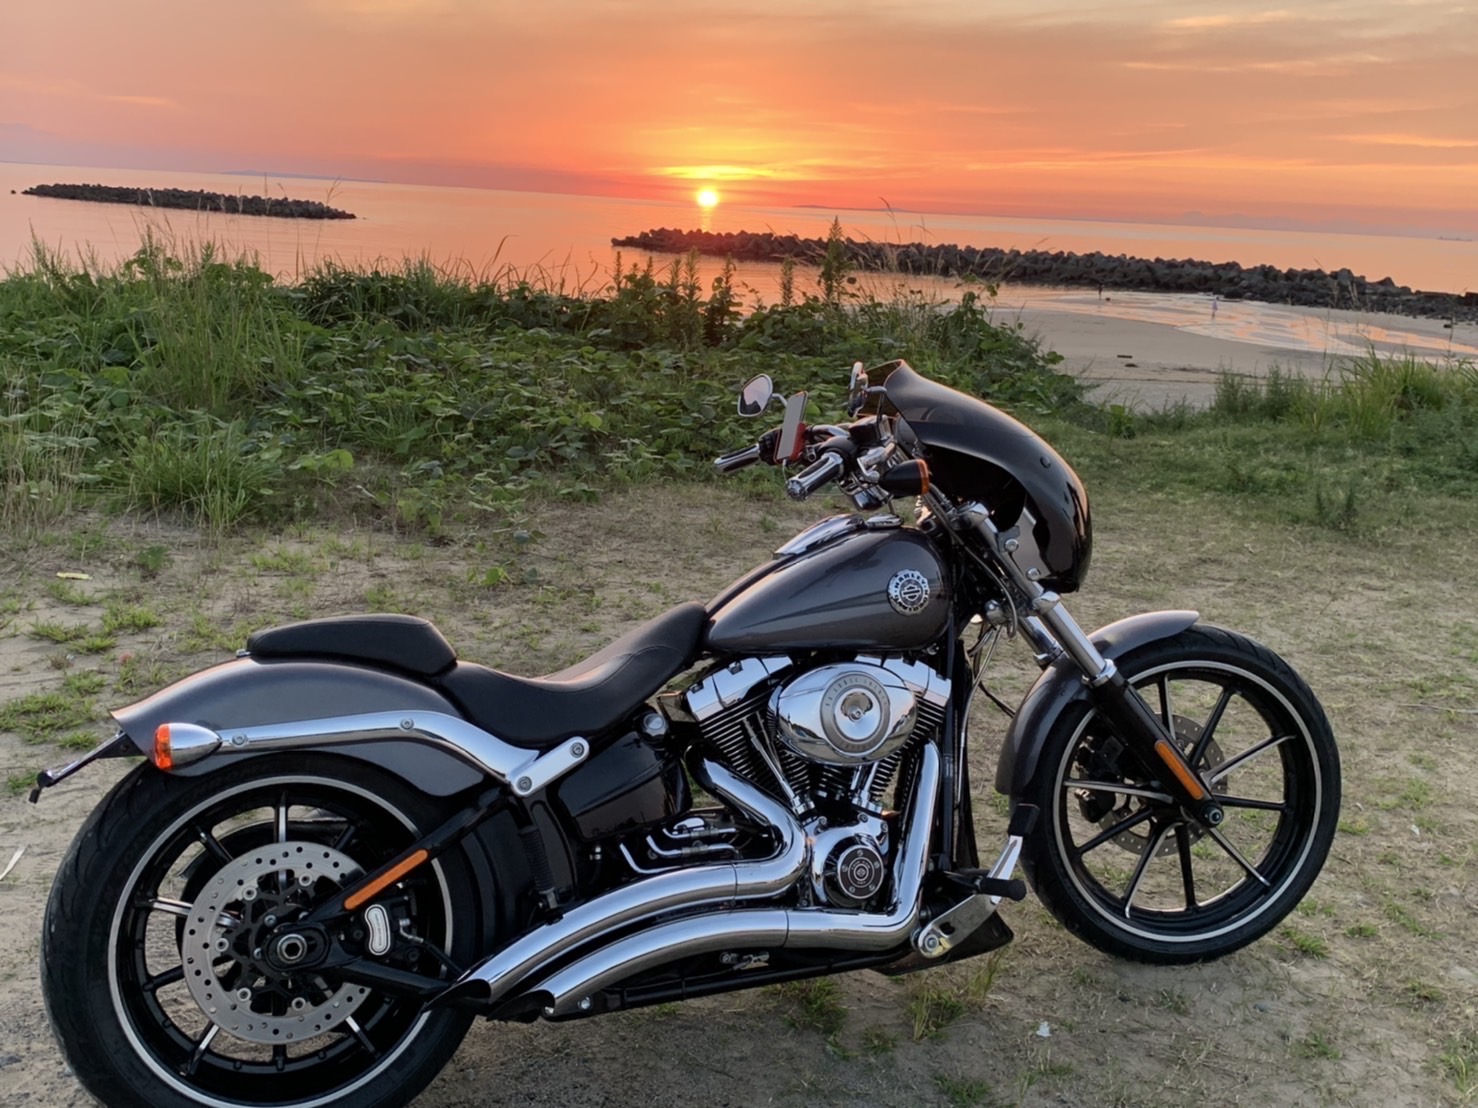 You are currently viewing ☆絶 景 ソロツーリング 二見ヶ浦の夕陽　Harley-Davidson FXSB Breakout ☆